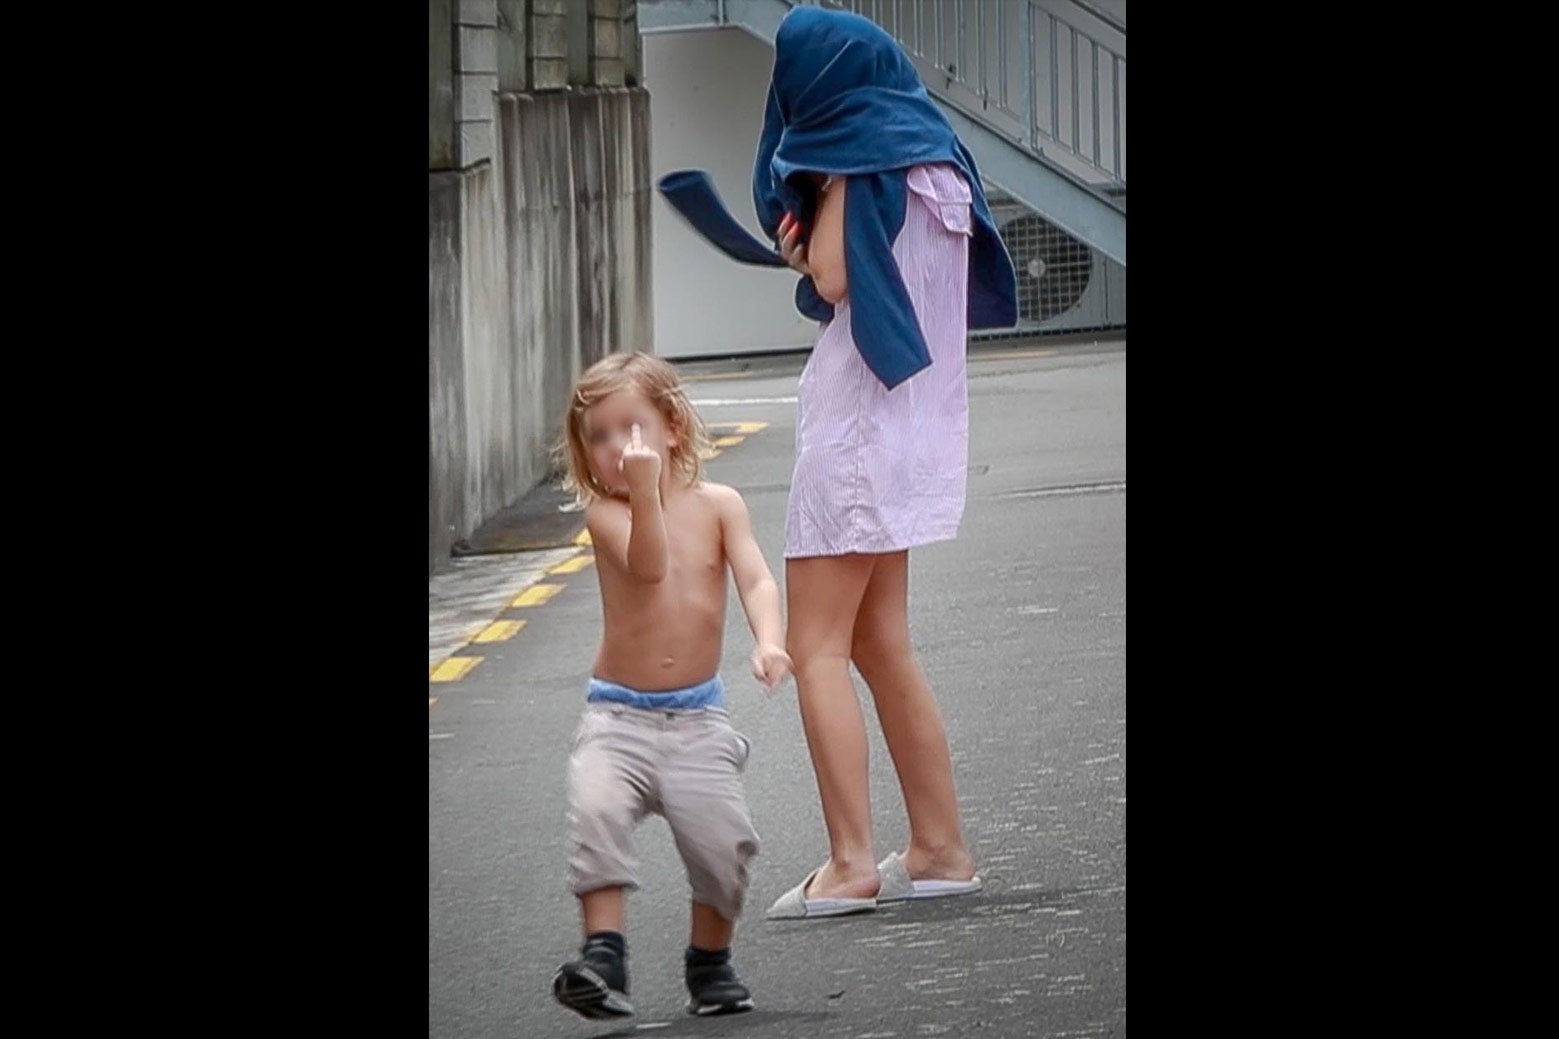 A shirtless young boy flips off the camera. Beside him, a female relative covers her face with pants.